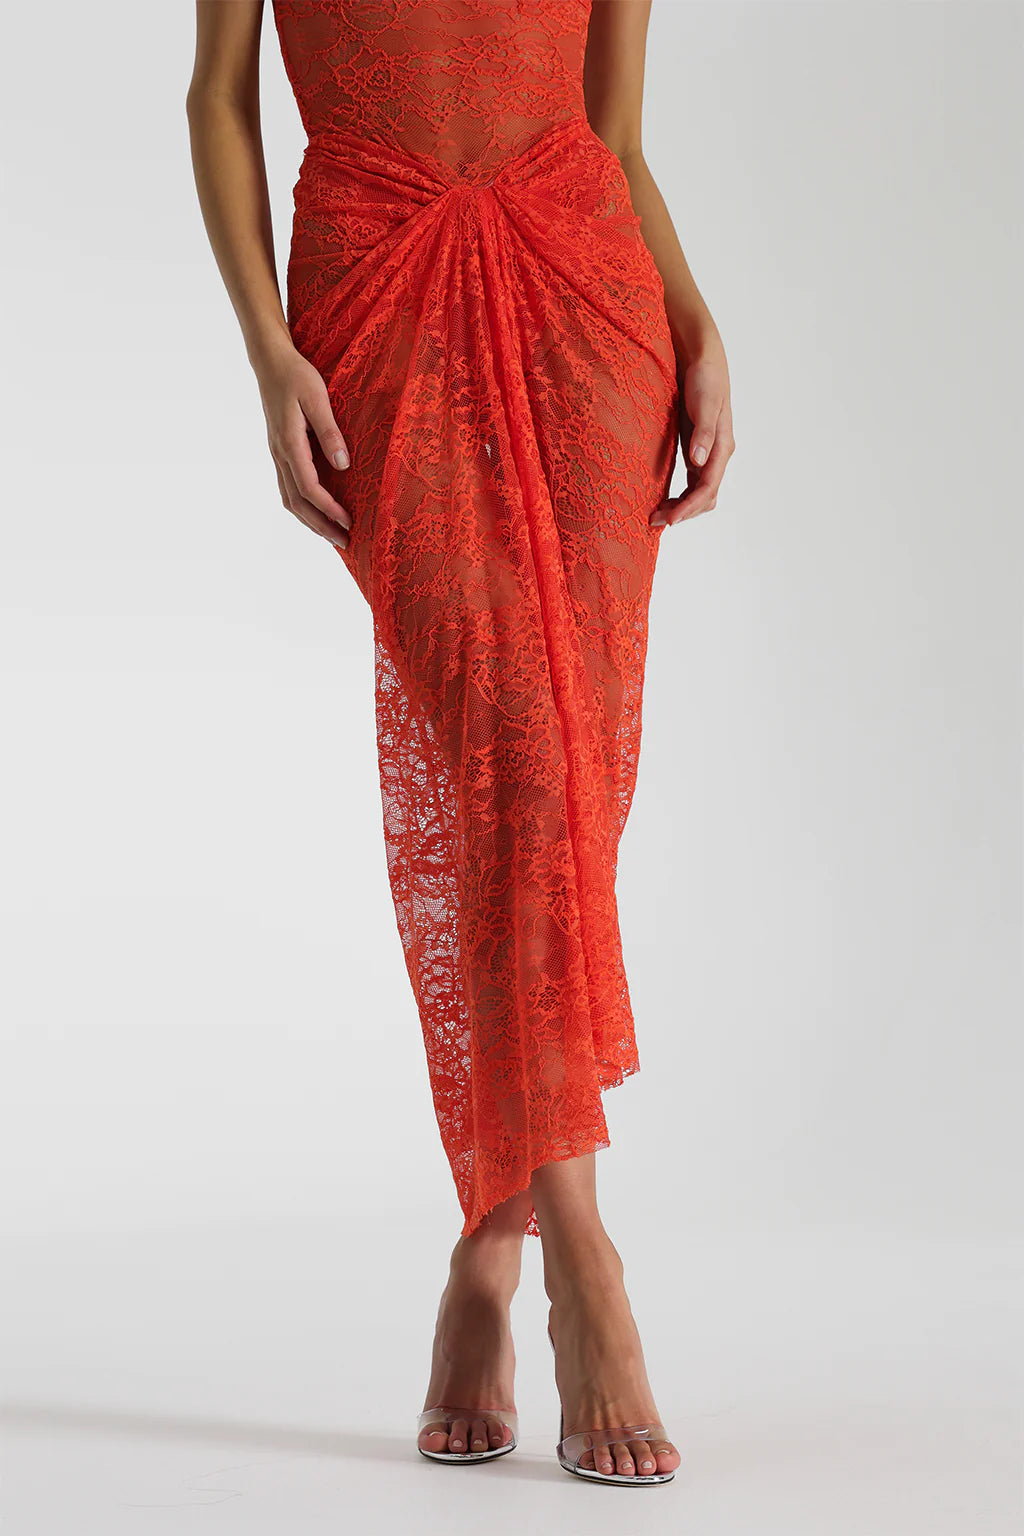 Hire Natalie Rolt Naomi Dress in Tangerine Lace